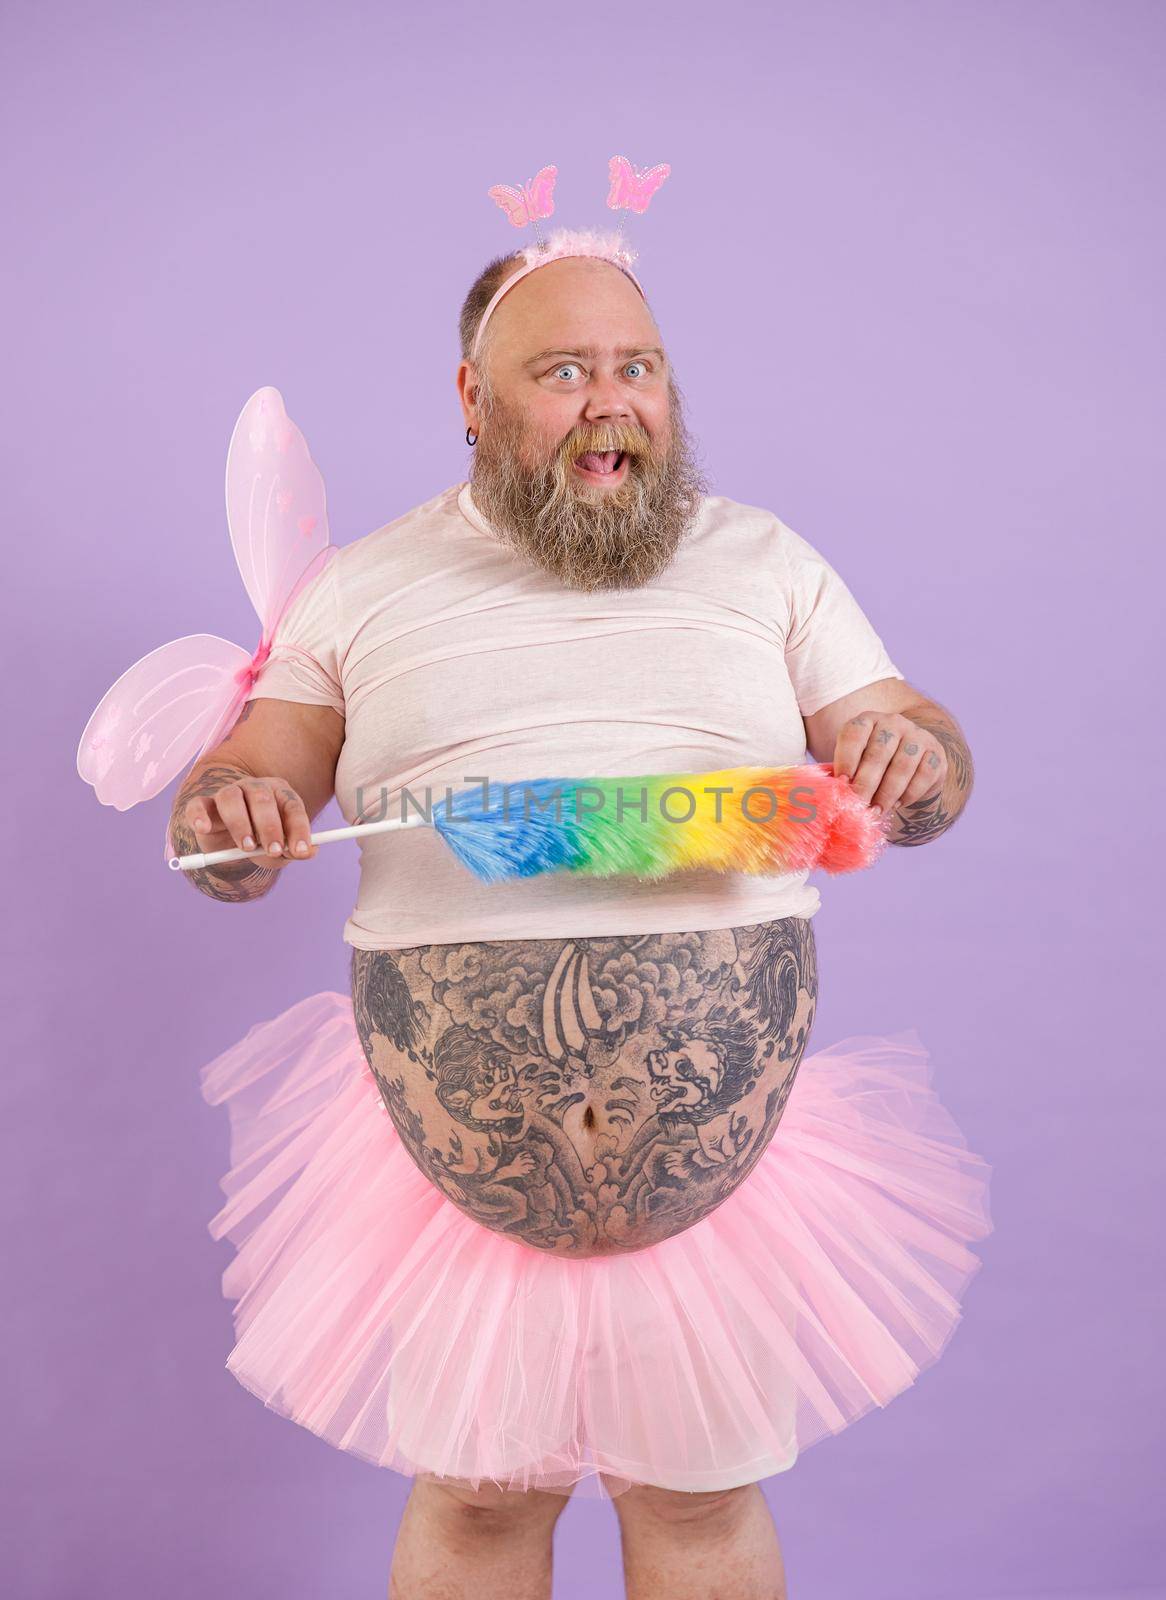 Bearded plump man in fairy costume holds colorful pp duster on purple background by Yaroslav_astakhov